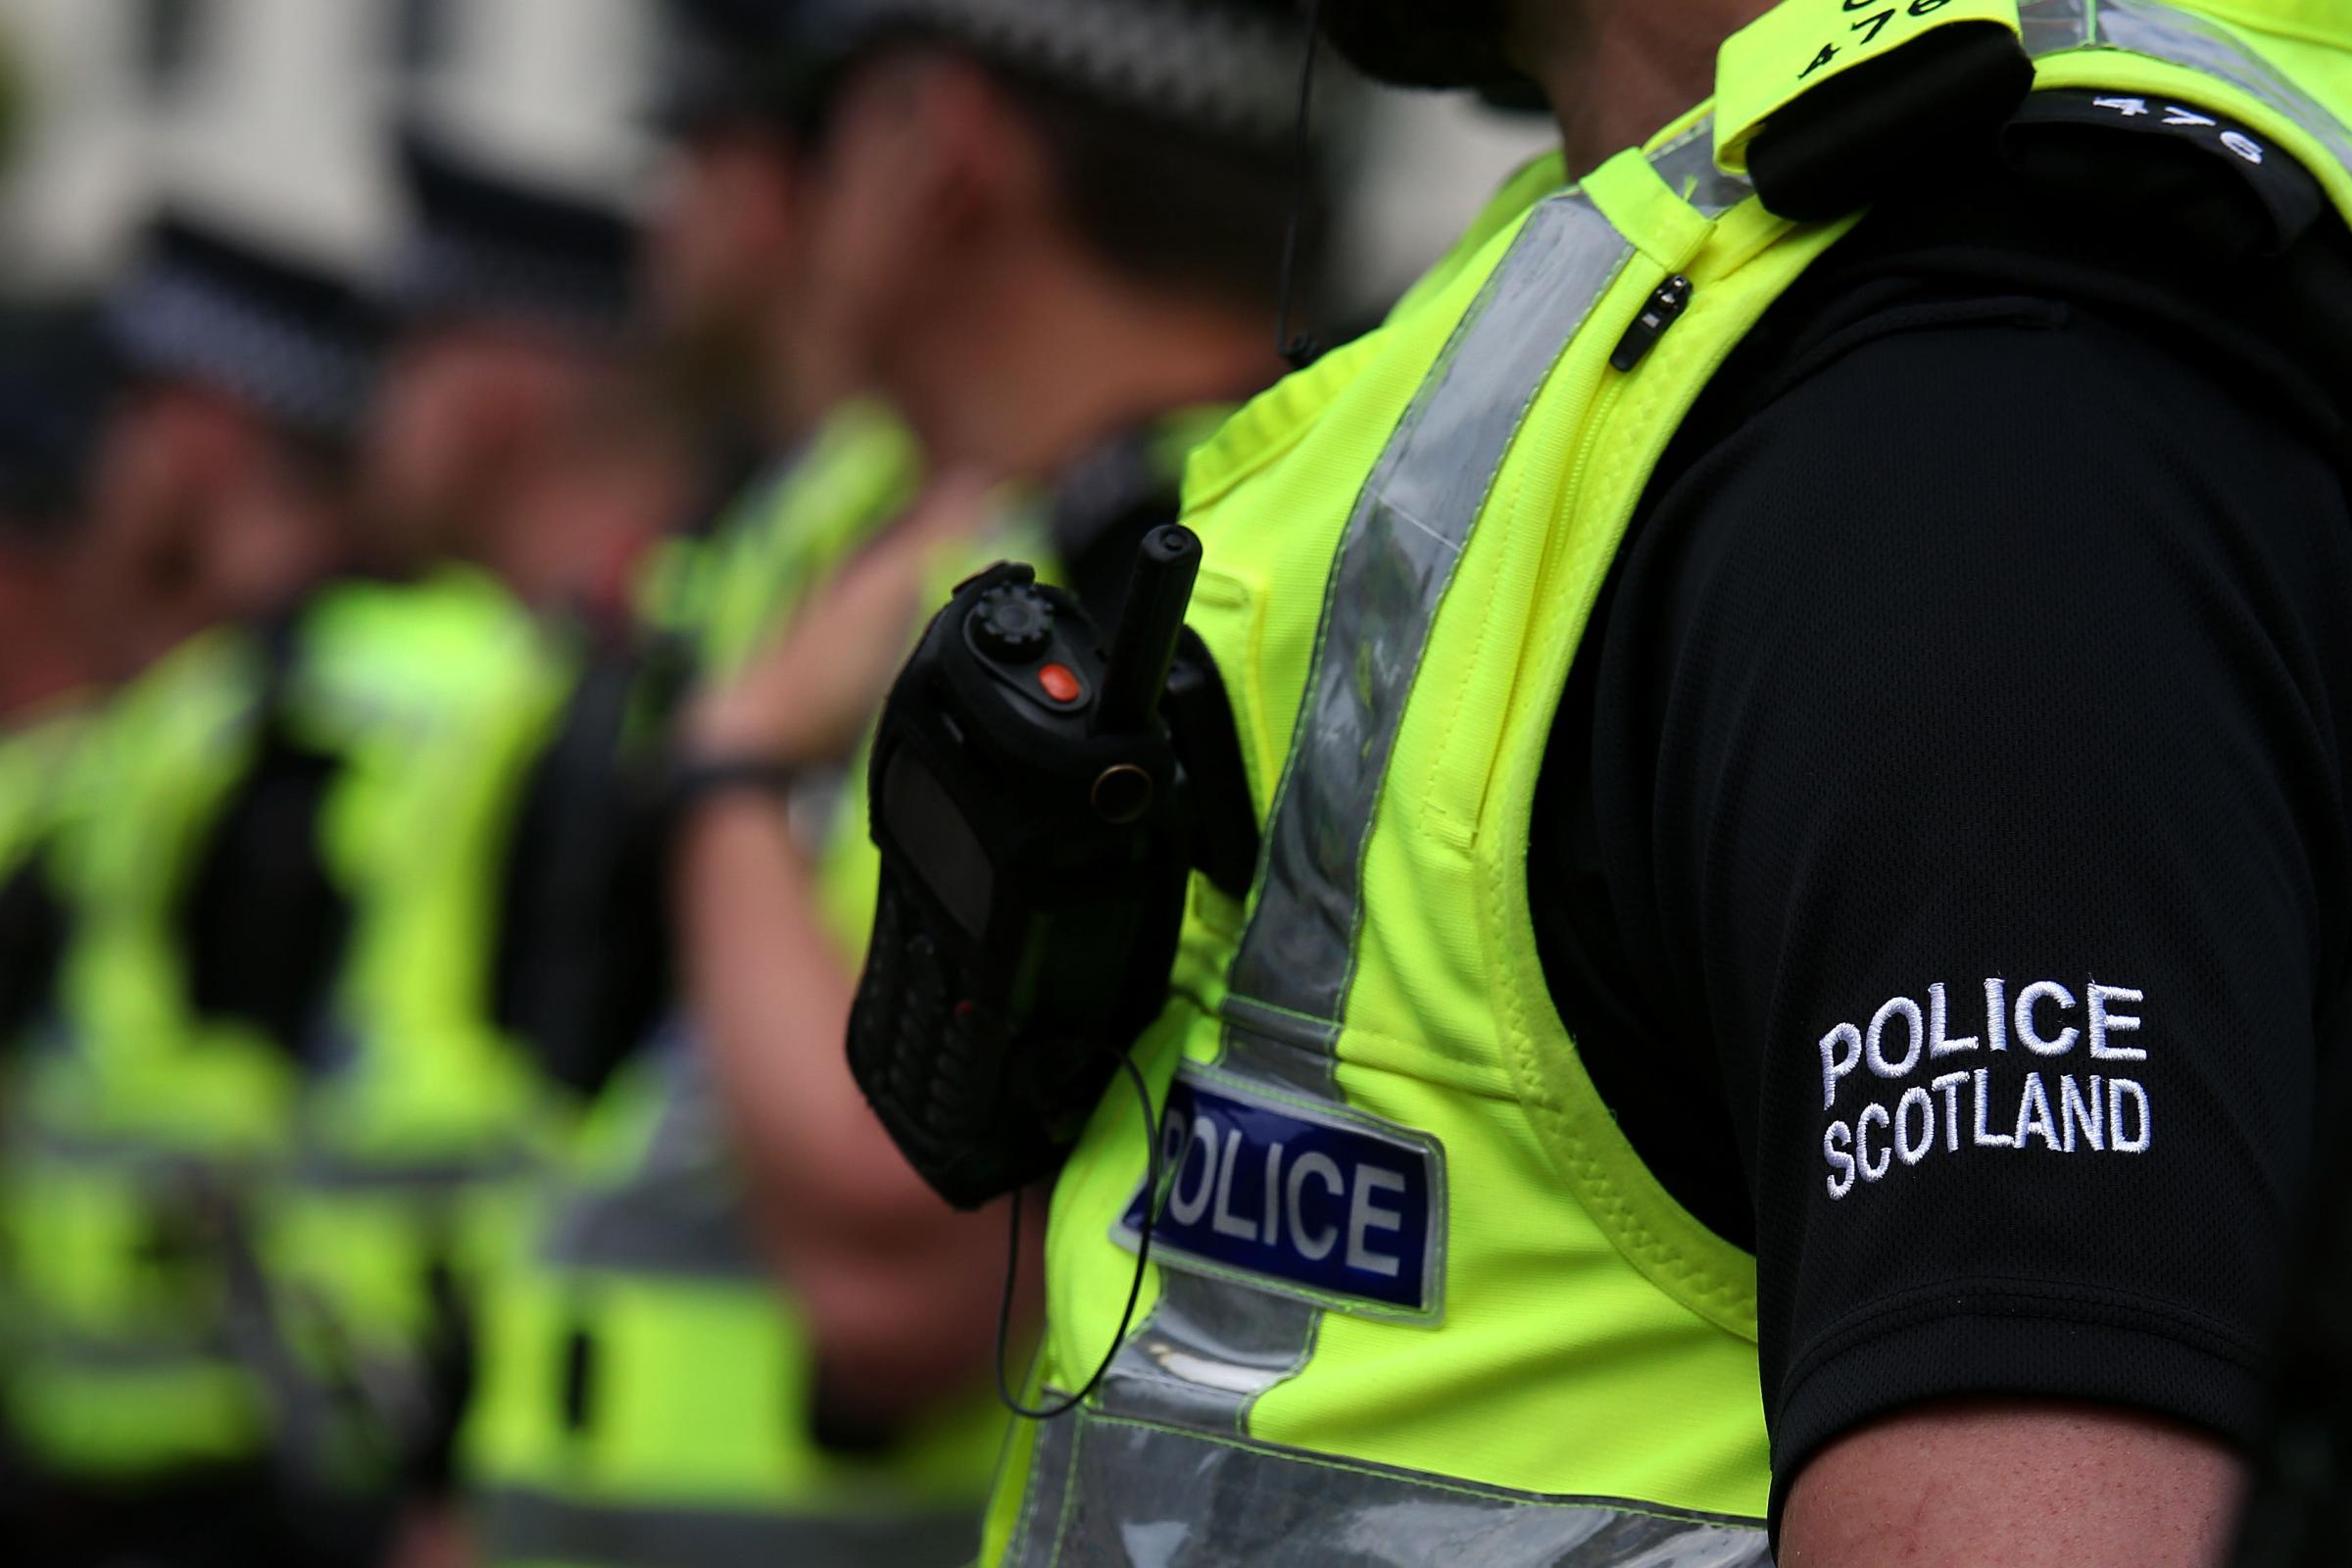 Police Scotland destroy dog after woman seriously injured in attack – The National